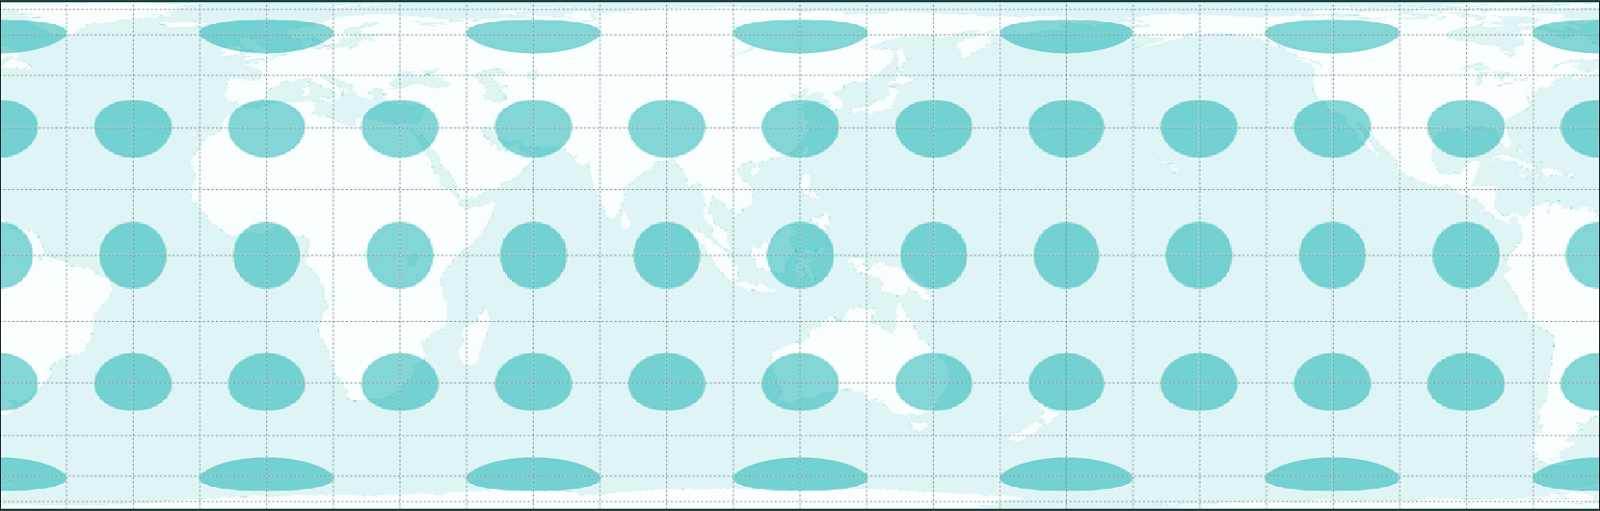 Equal-area map projection